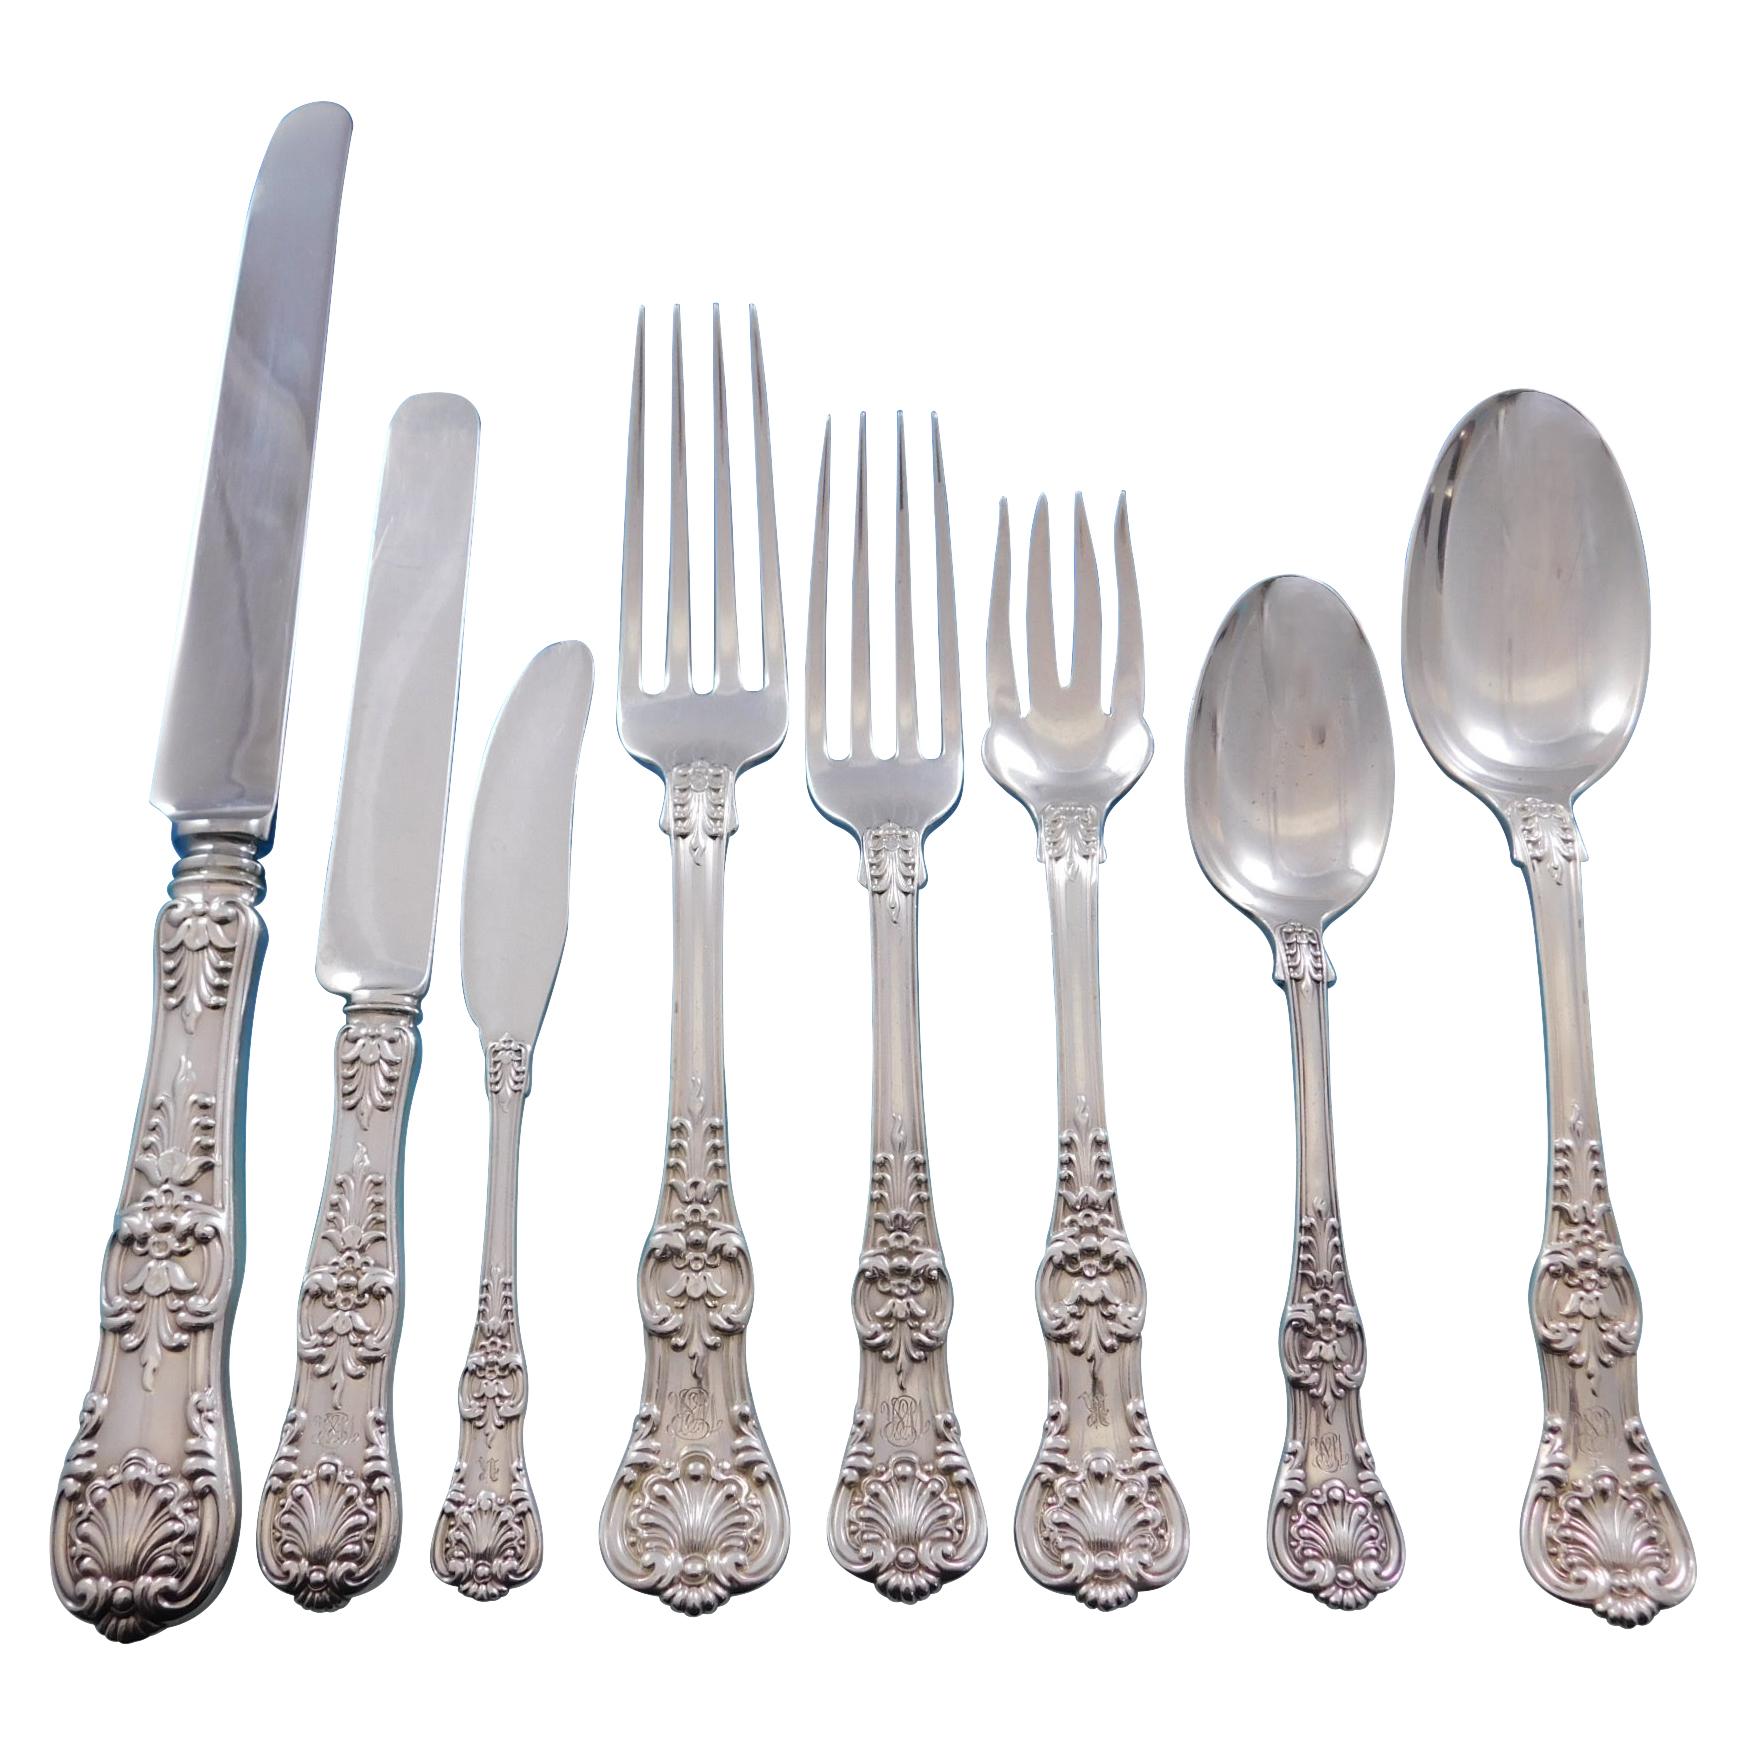 English King by Tiffany Sterling Silver Flatware Set Service 100 Pc Dinner Boxed